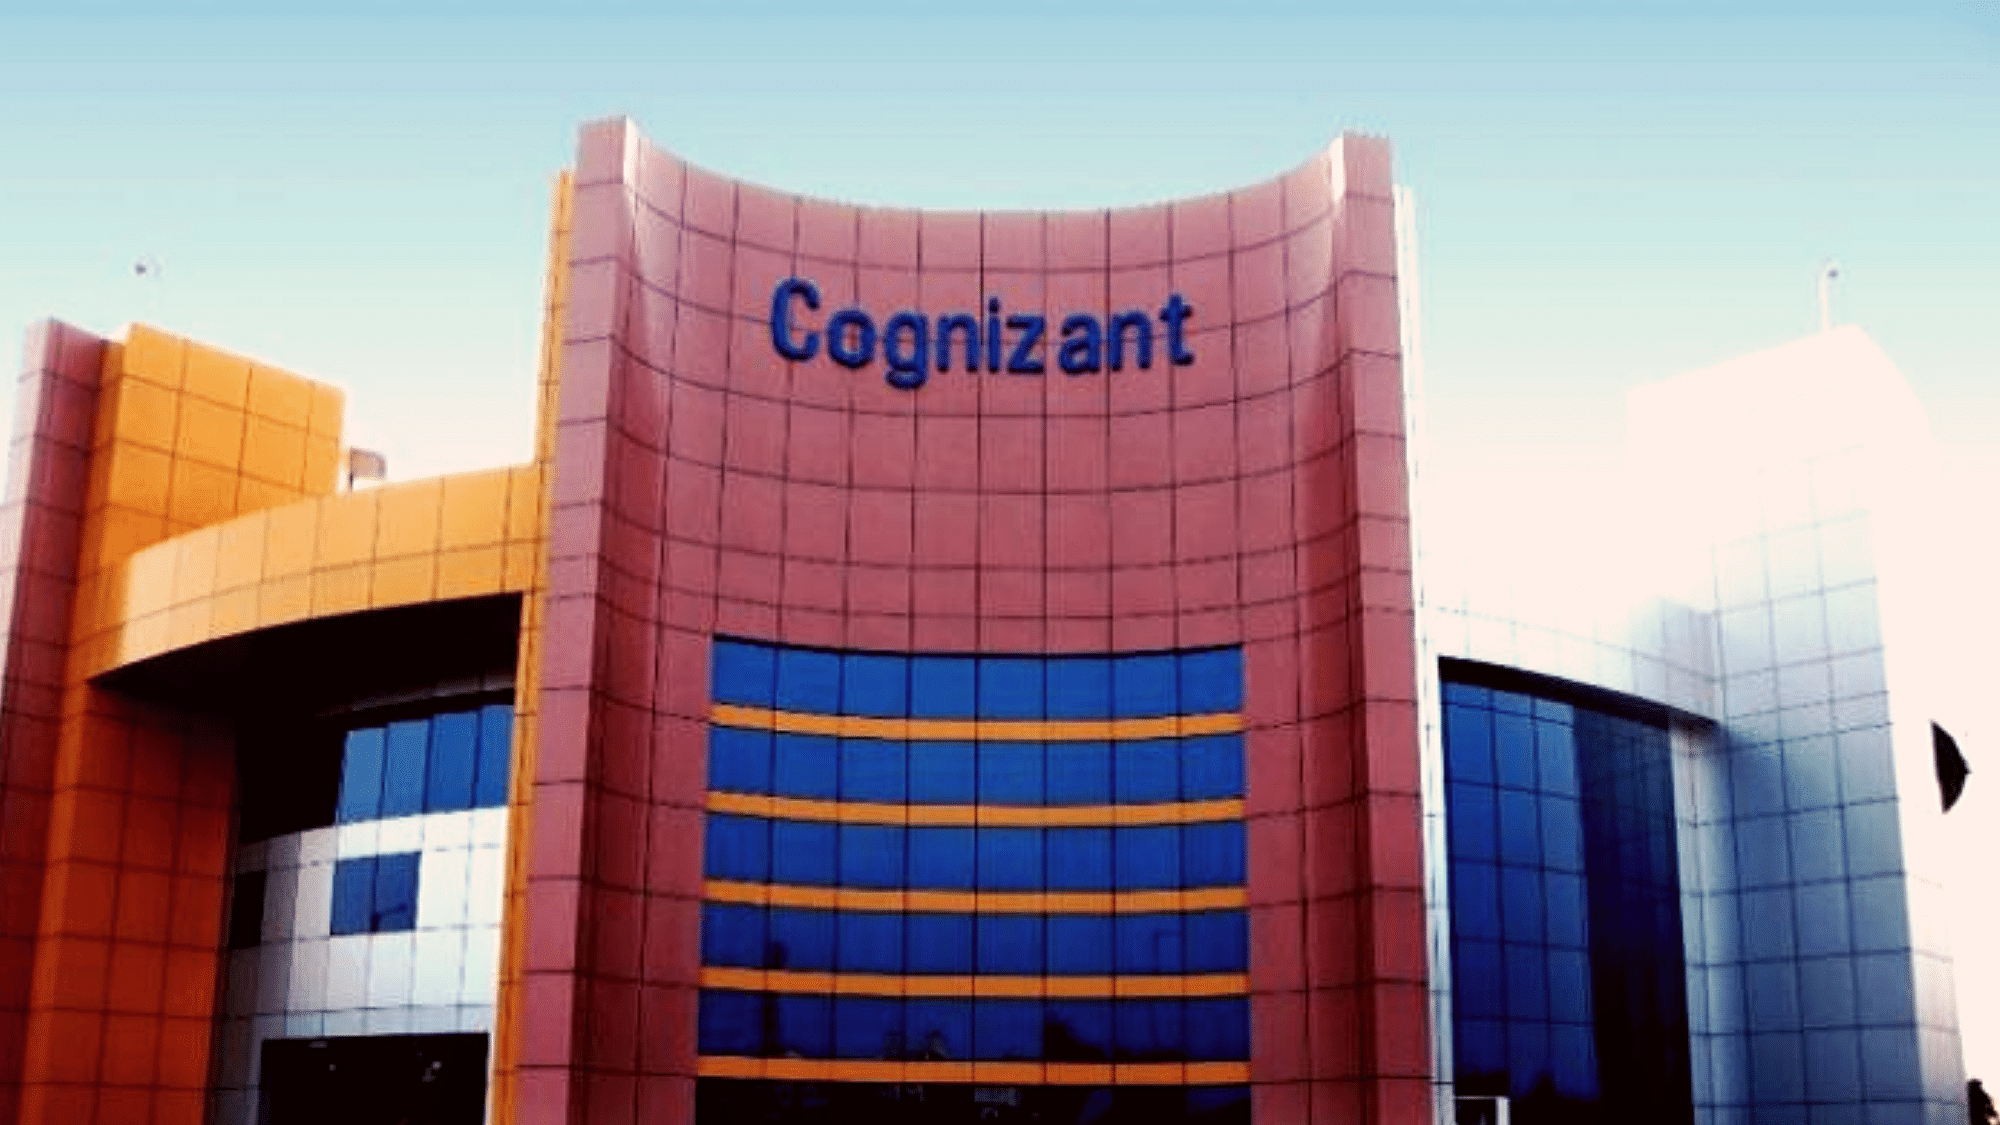 Cognizant will pay employees in India an additional sum for April in light of the coronavirus crisis.